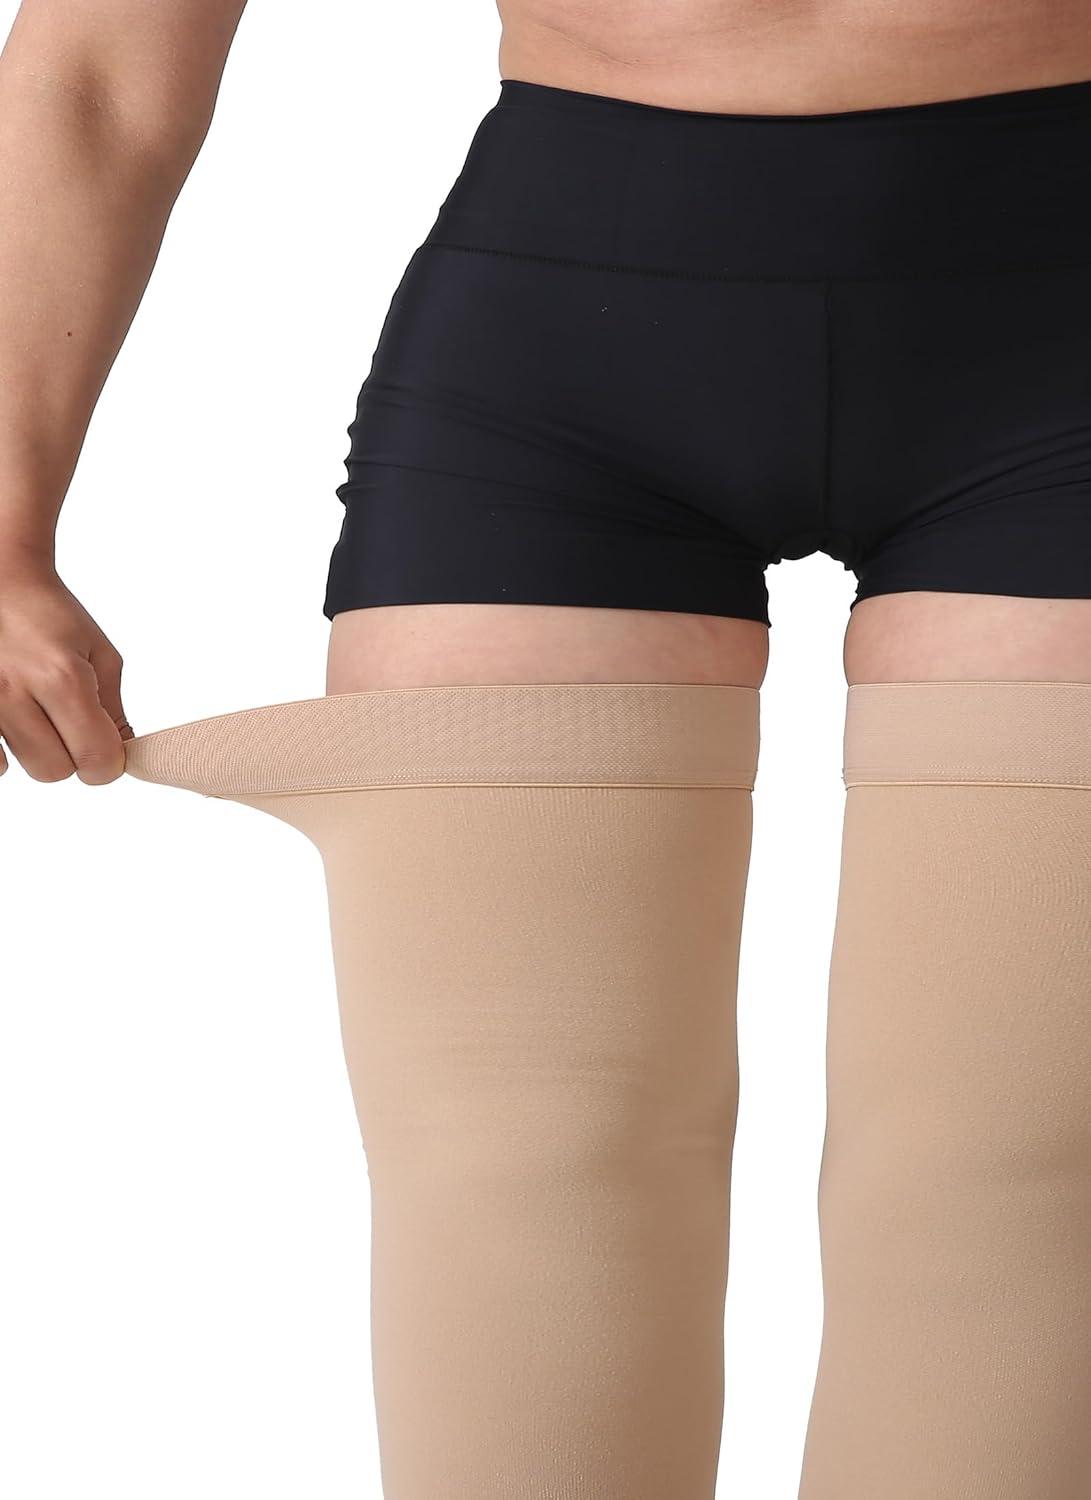 TOFLY Thigh High Compression Stockings Opaque 1 Pair Firm Support 20-30  mmHg Gradient Compression with Silicone Band Footless Compression Sleeves  Treatment Swelling Varicose Veins Edema. L 15-20mmhg Black